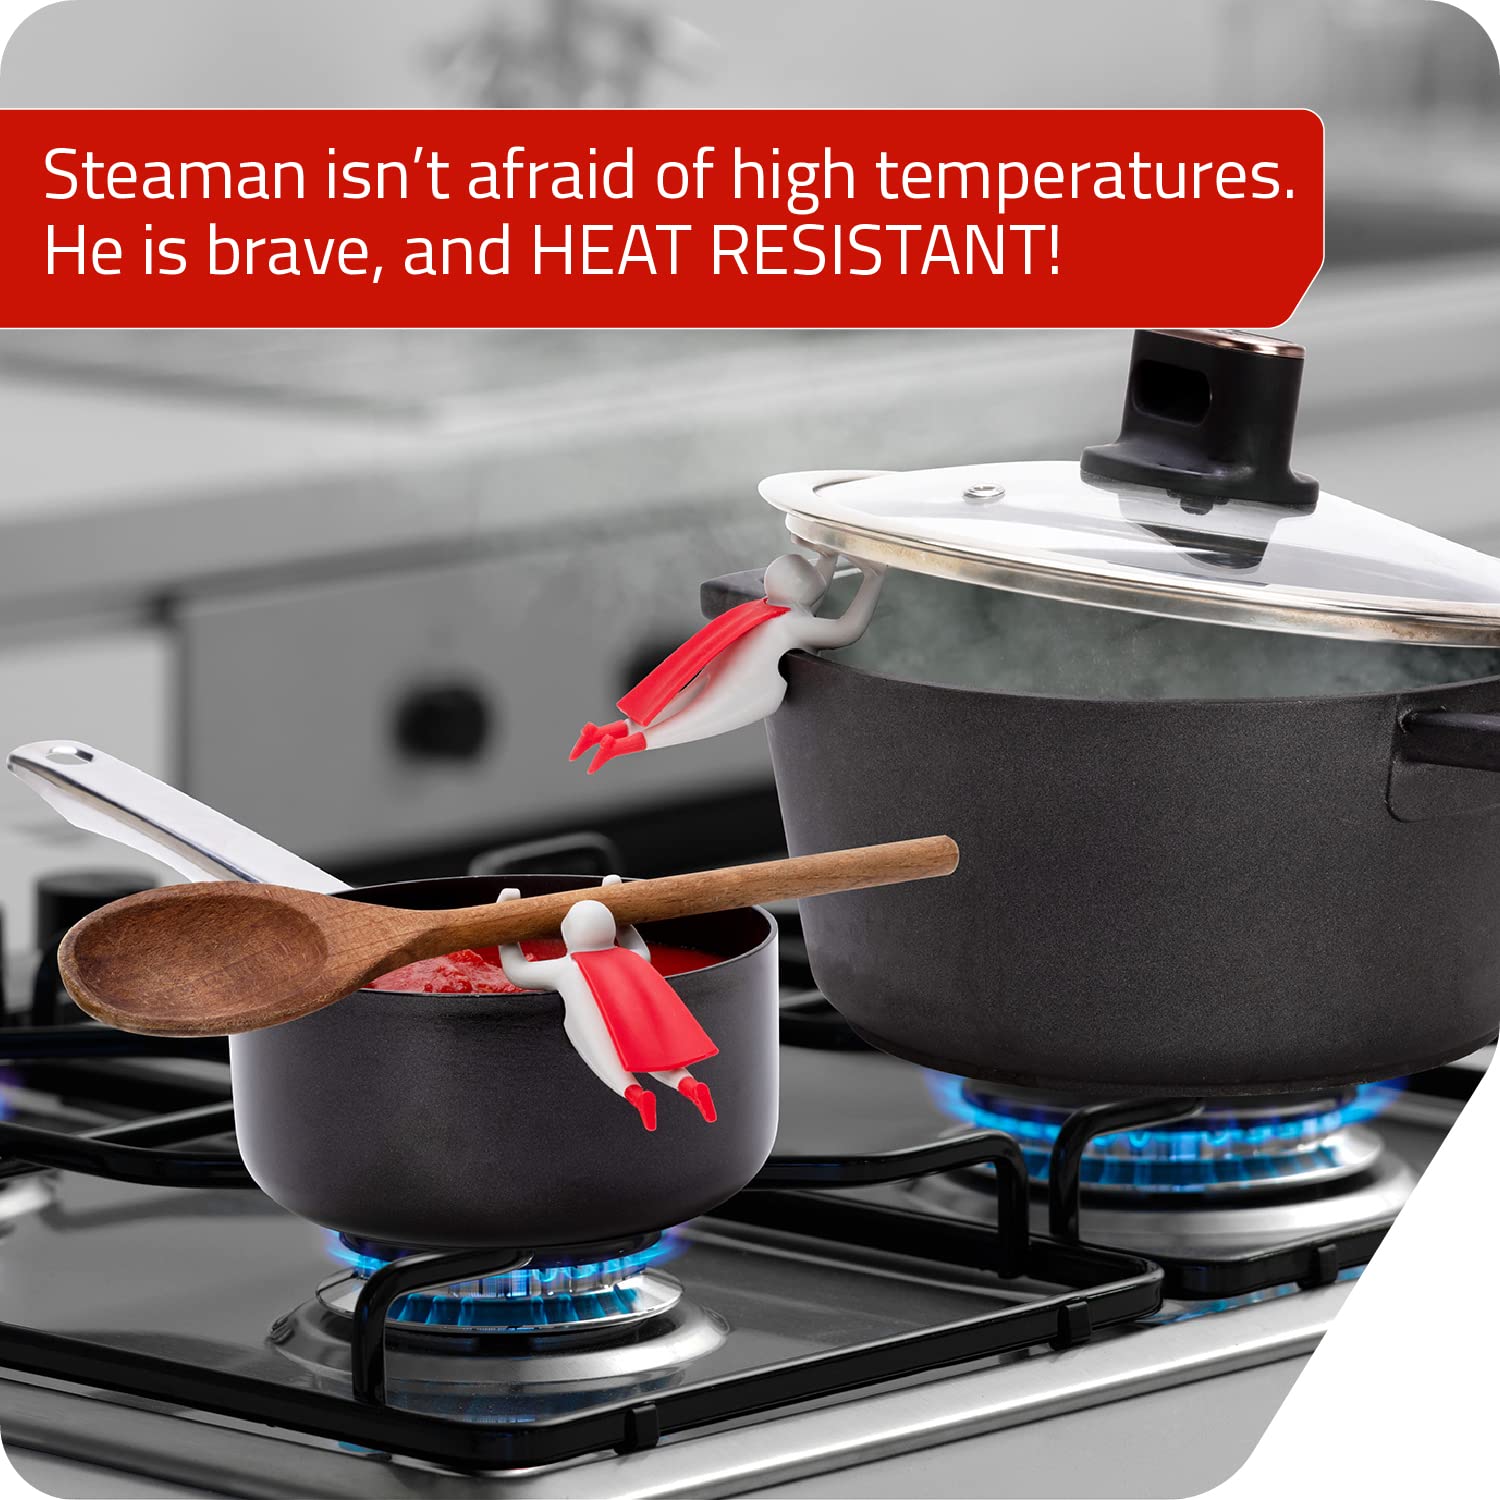 Steaman: Steam Releaser for Pot Top and Edge-Sitting Spoon Holder | Superhero-Themed Steam Releaser to Keep the Lid Slightly Lifted and Help Reduce Sauces | Cute Kitchen Accessories by Peleg Design